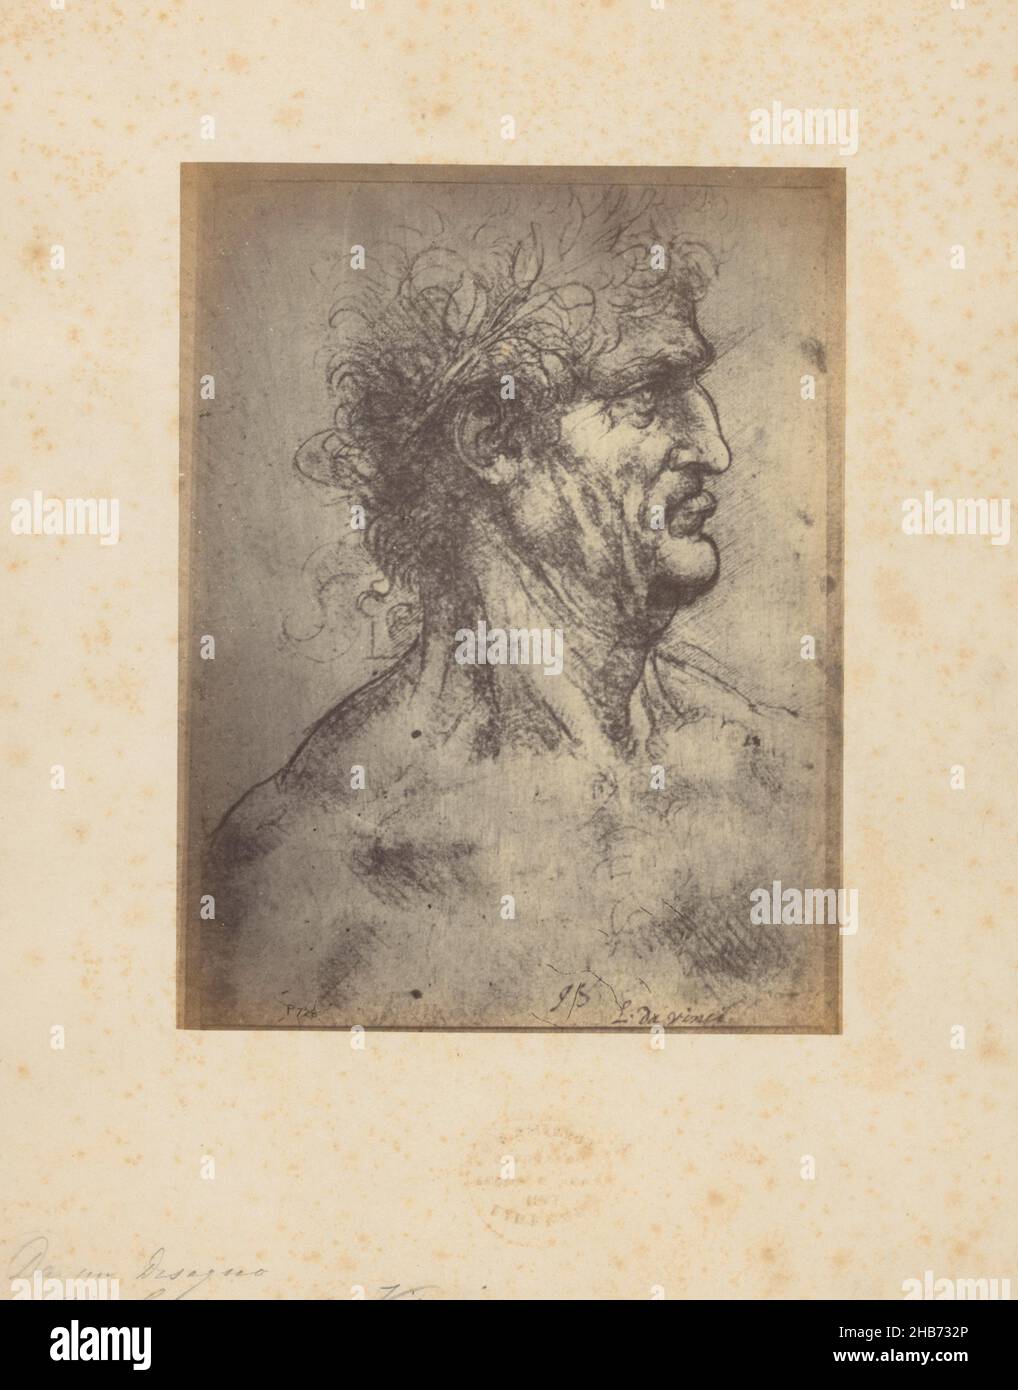 Photoreproduction of a drawing of a man's head by Leonardo da Vinci, Giovanni Brampton Philpot (mentioned on object), intermediary draughtsman: Leonardo da Vinci (mentioned on object), Florence, 1851 - 1878, paper, cardboard, albumen print, height 193 mm × width 148 mmheight 315 mm × width 245 mm Stock Photo